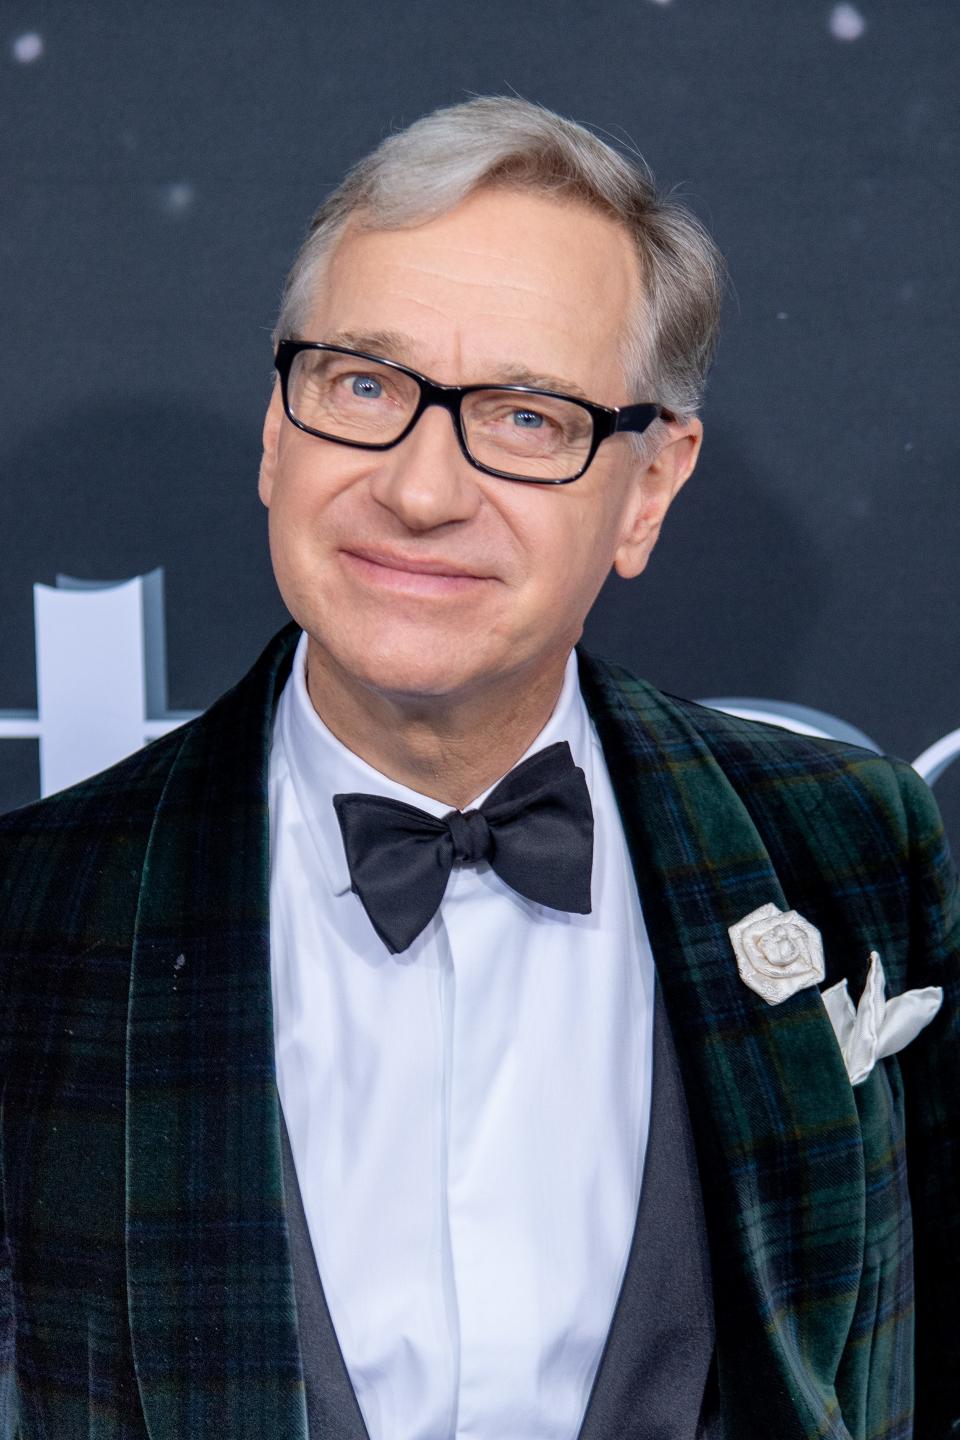 Paul Feig is a "ReFrame ambassador," a peer-to-peer initiative that aims to help build a more equitable workforce in Hollywood.